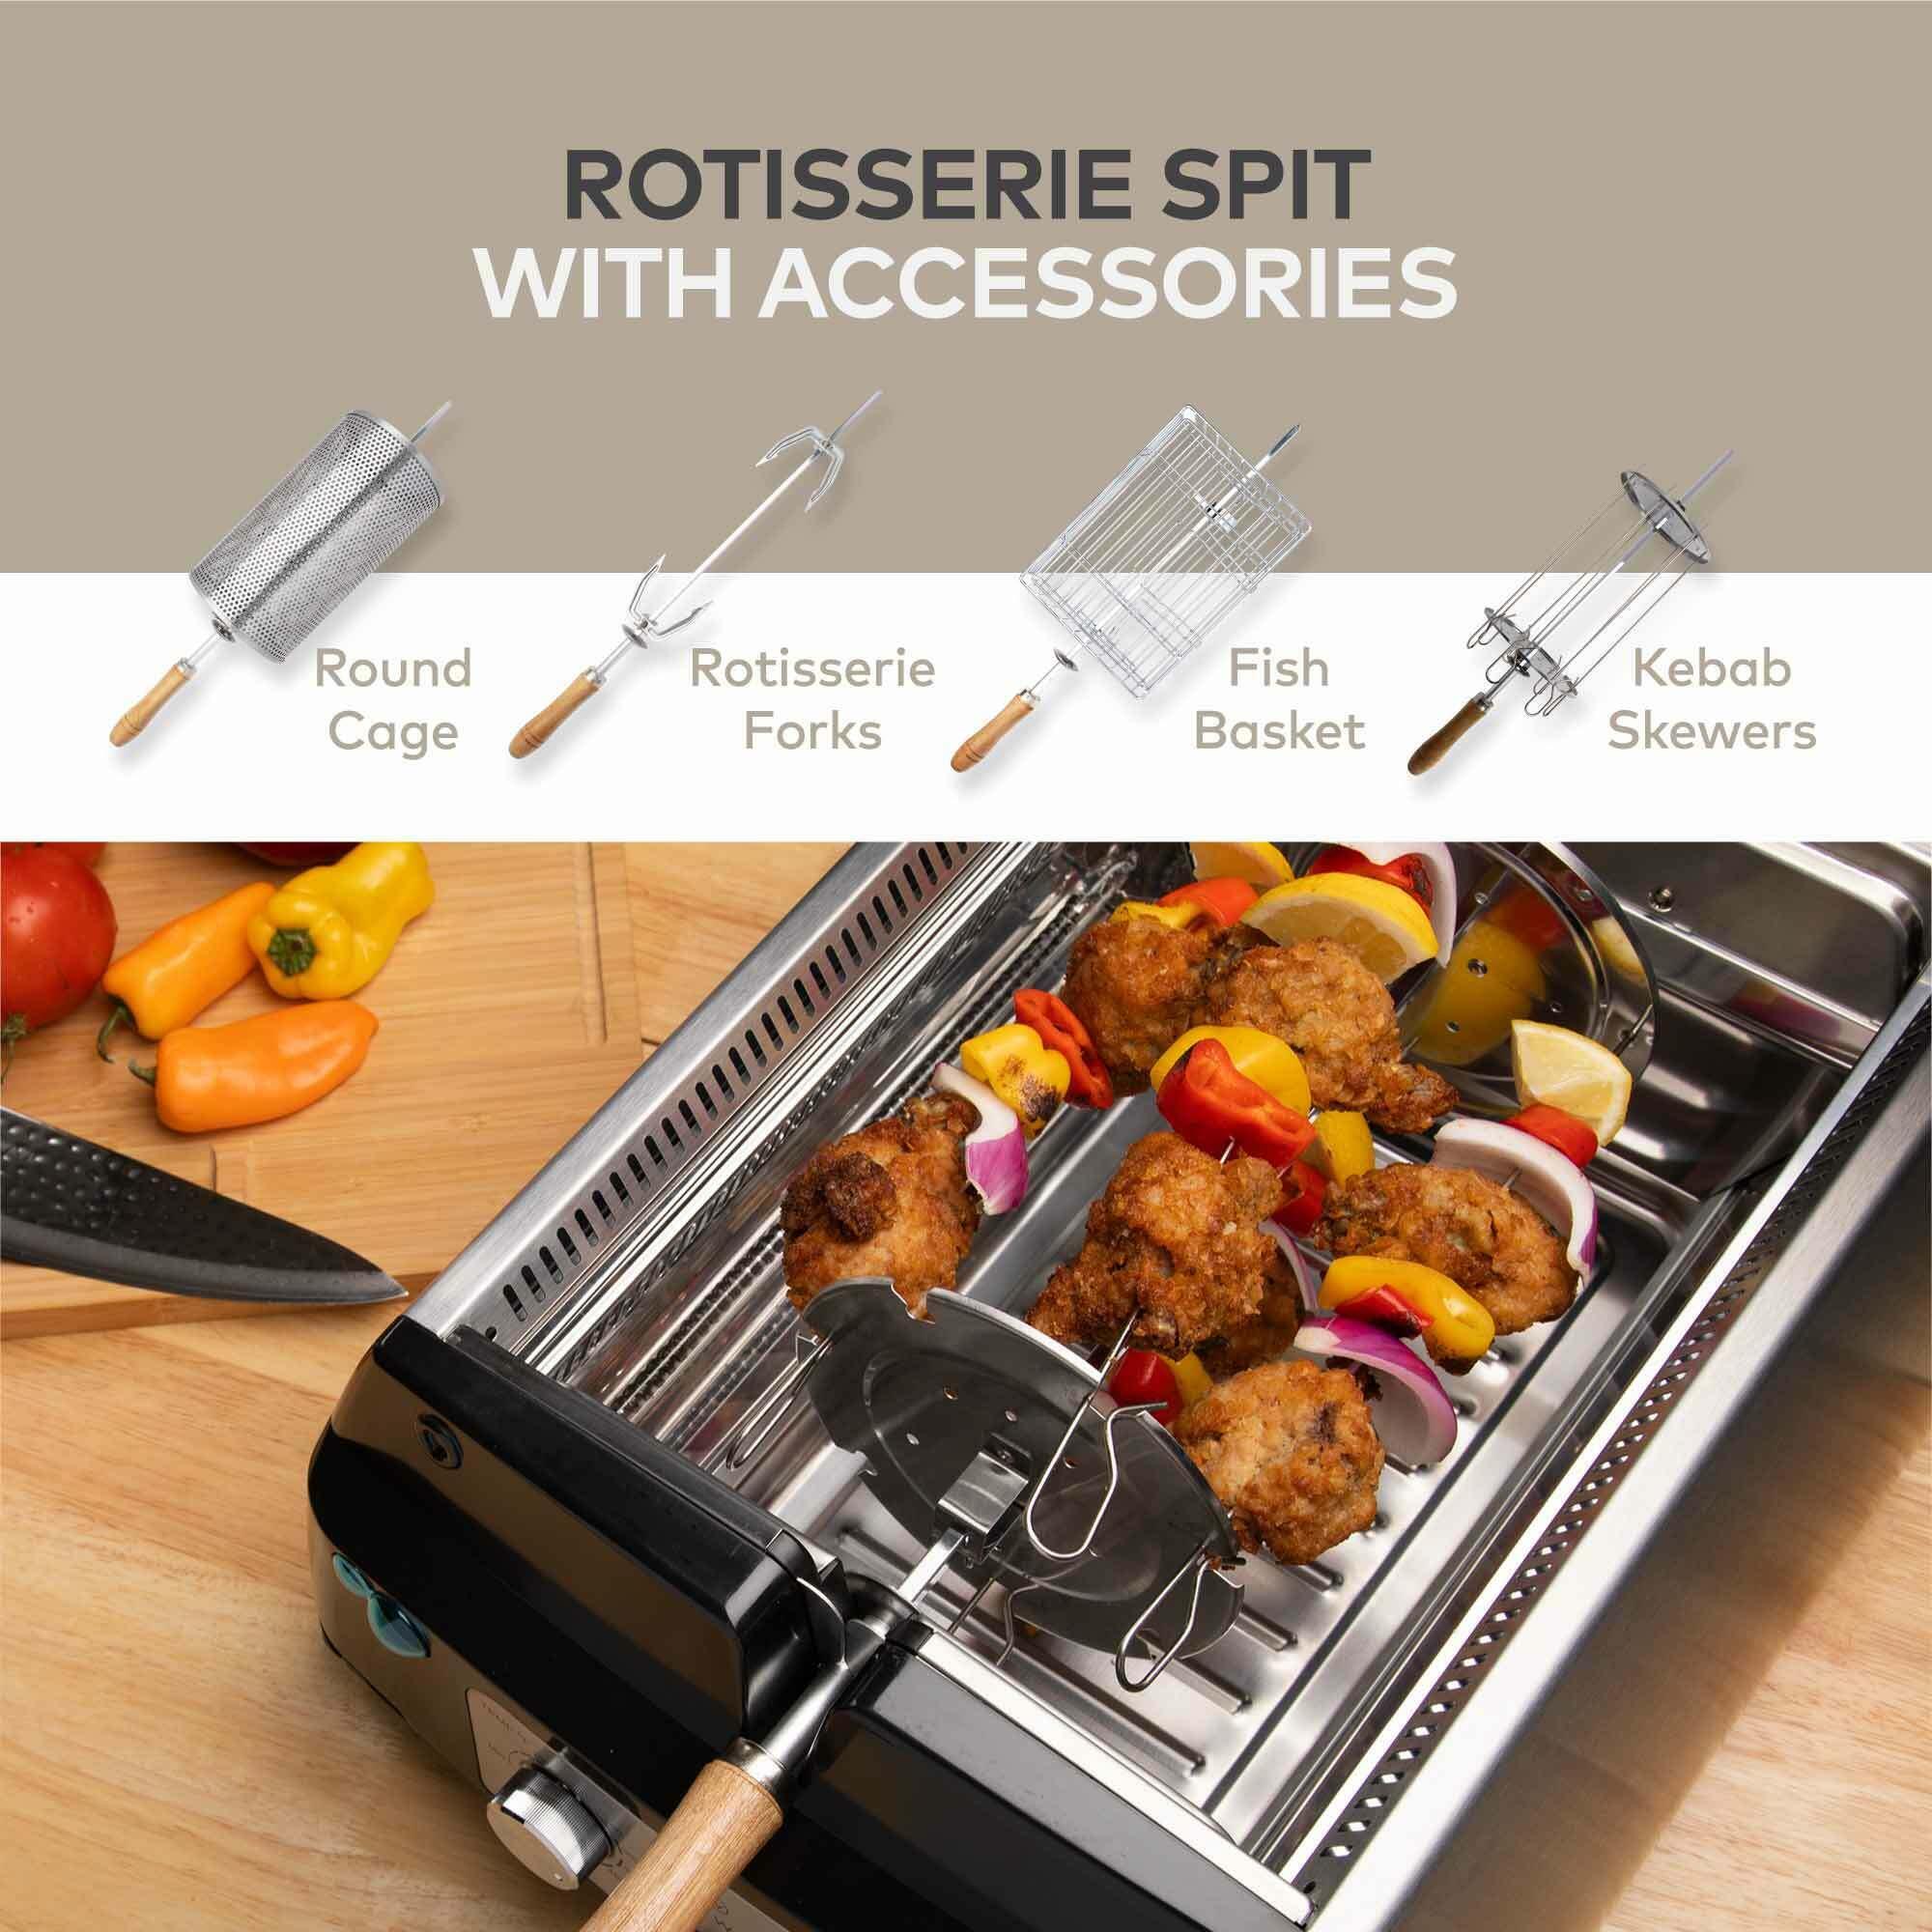 ChefWave Sosaku Smokeless Infrared Rotisserie Indoor Tabletop Grill - image 4 of 17